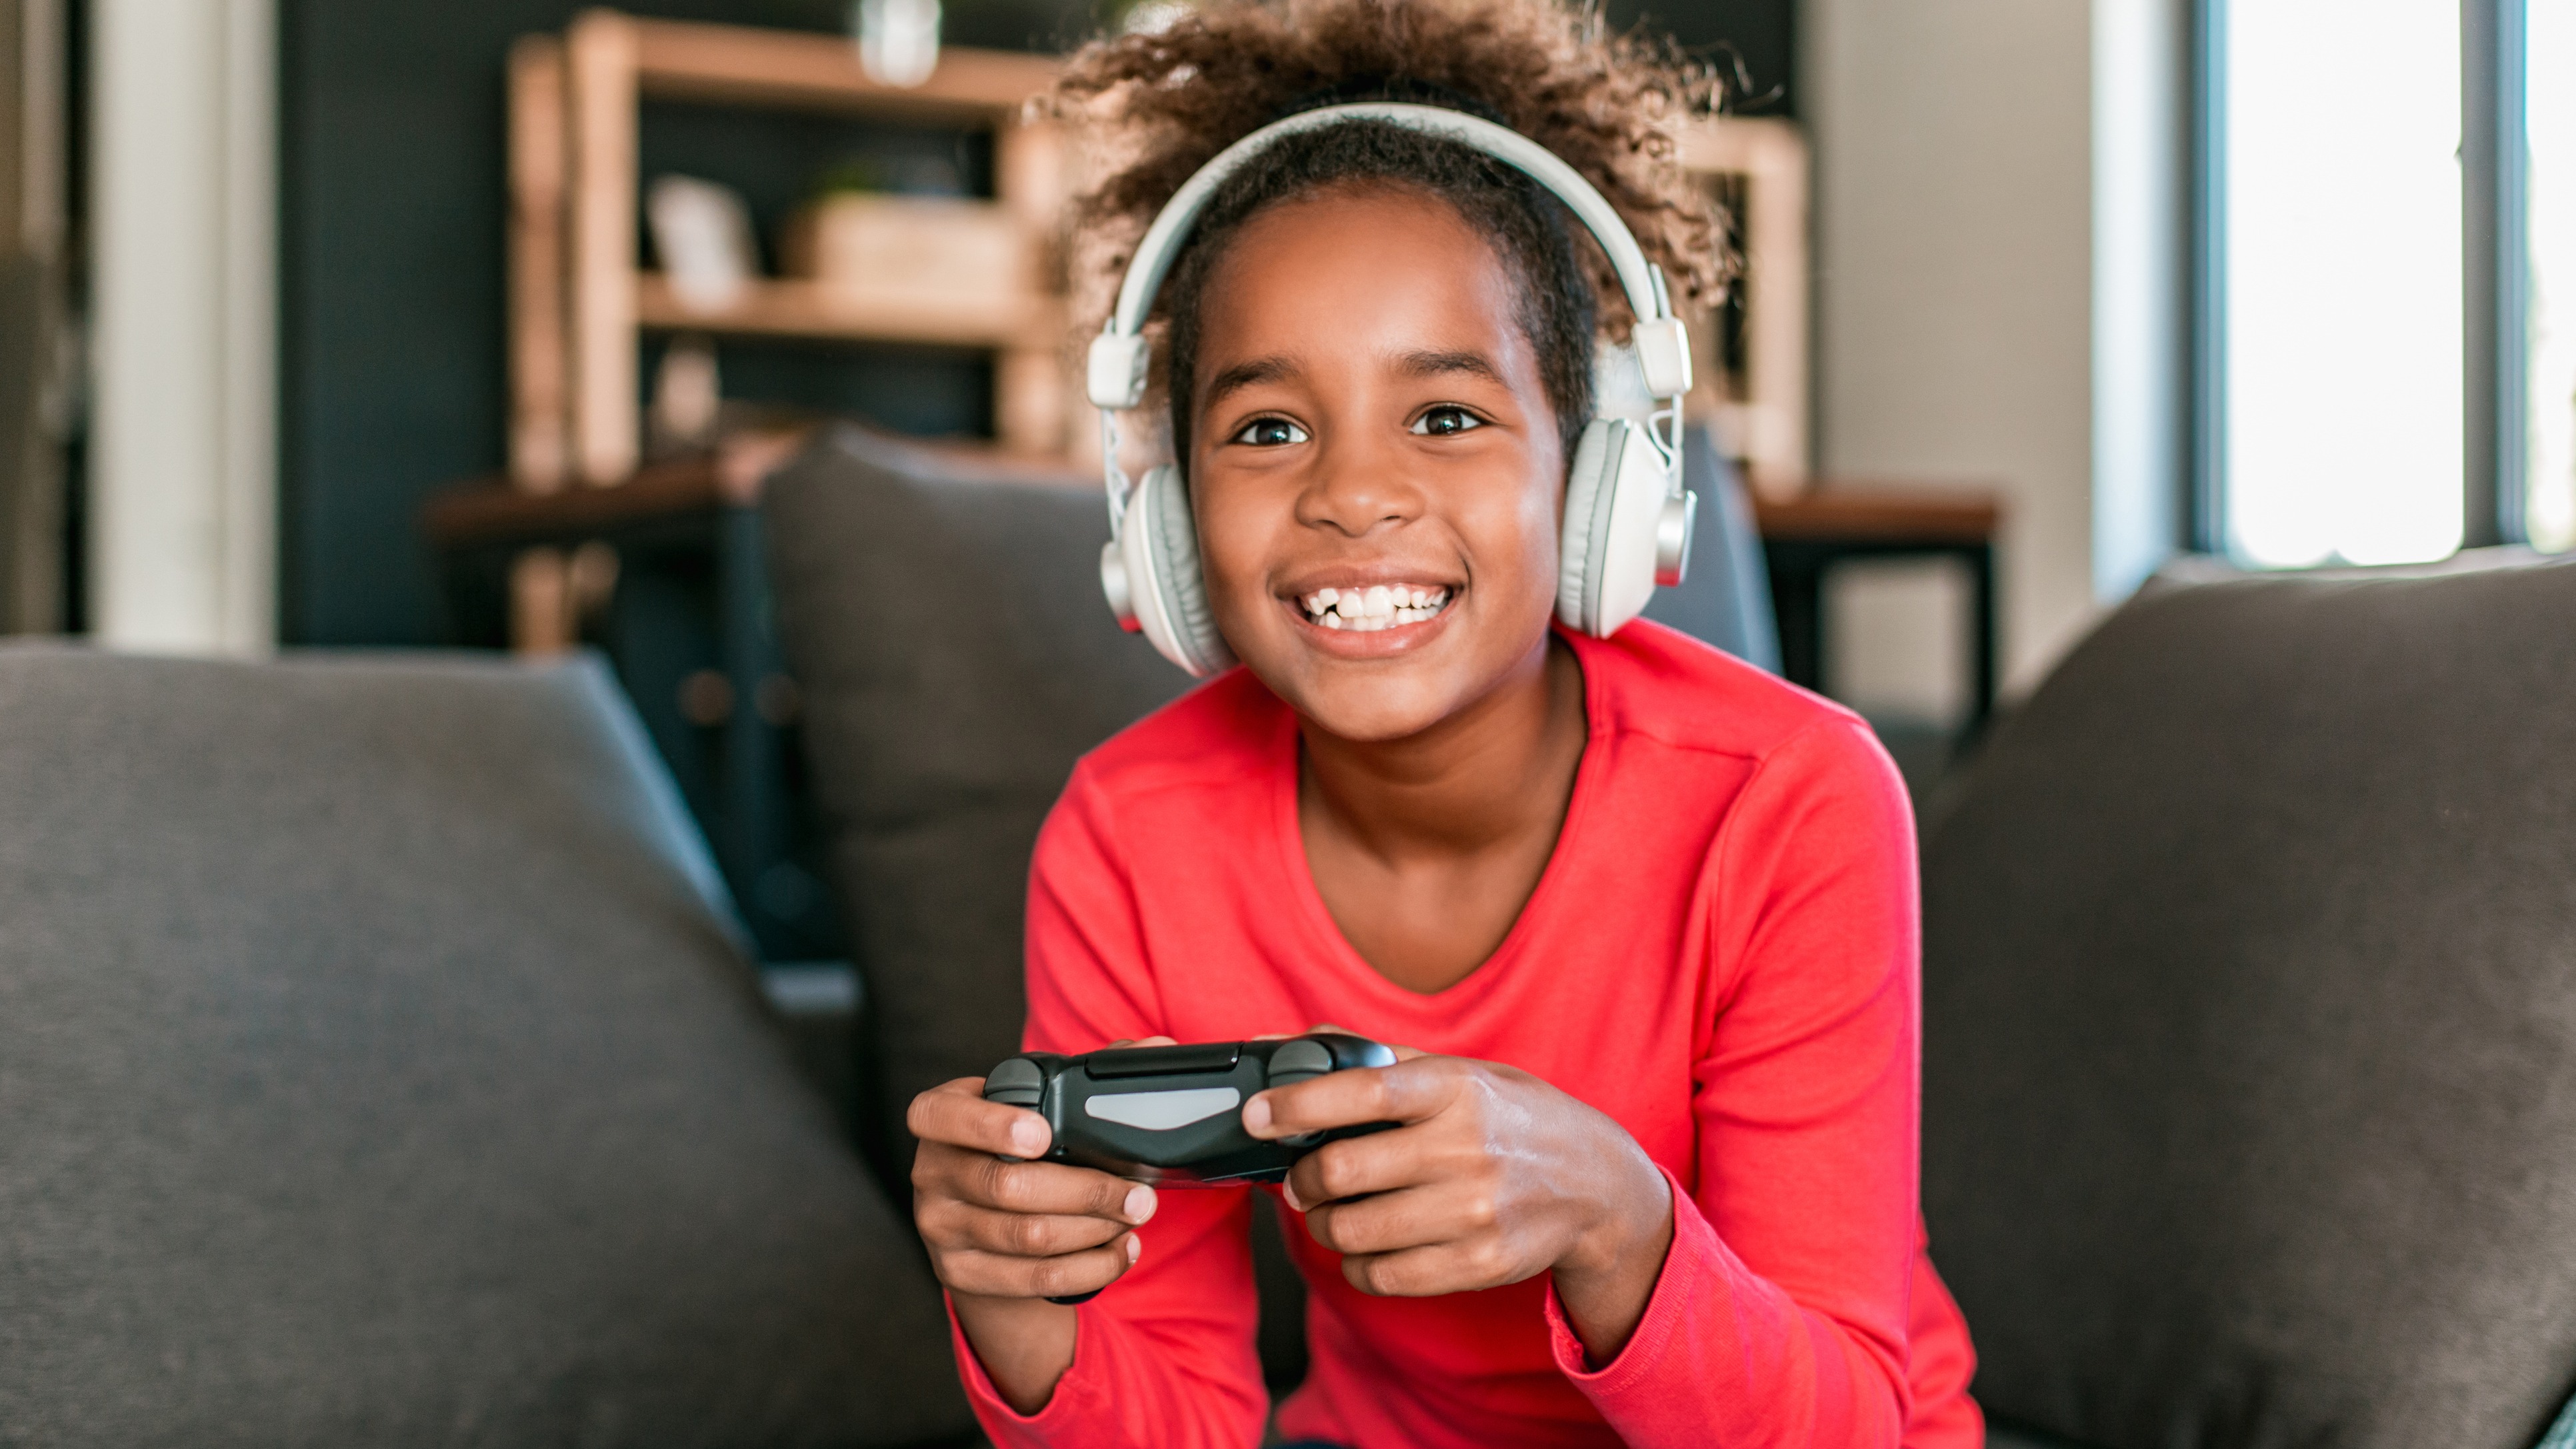 13 (Secretly) Educational Video Games That Kids Will Actually Like - CNET